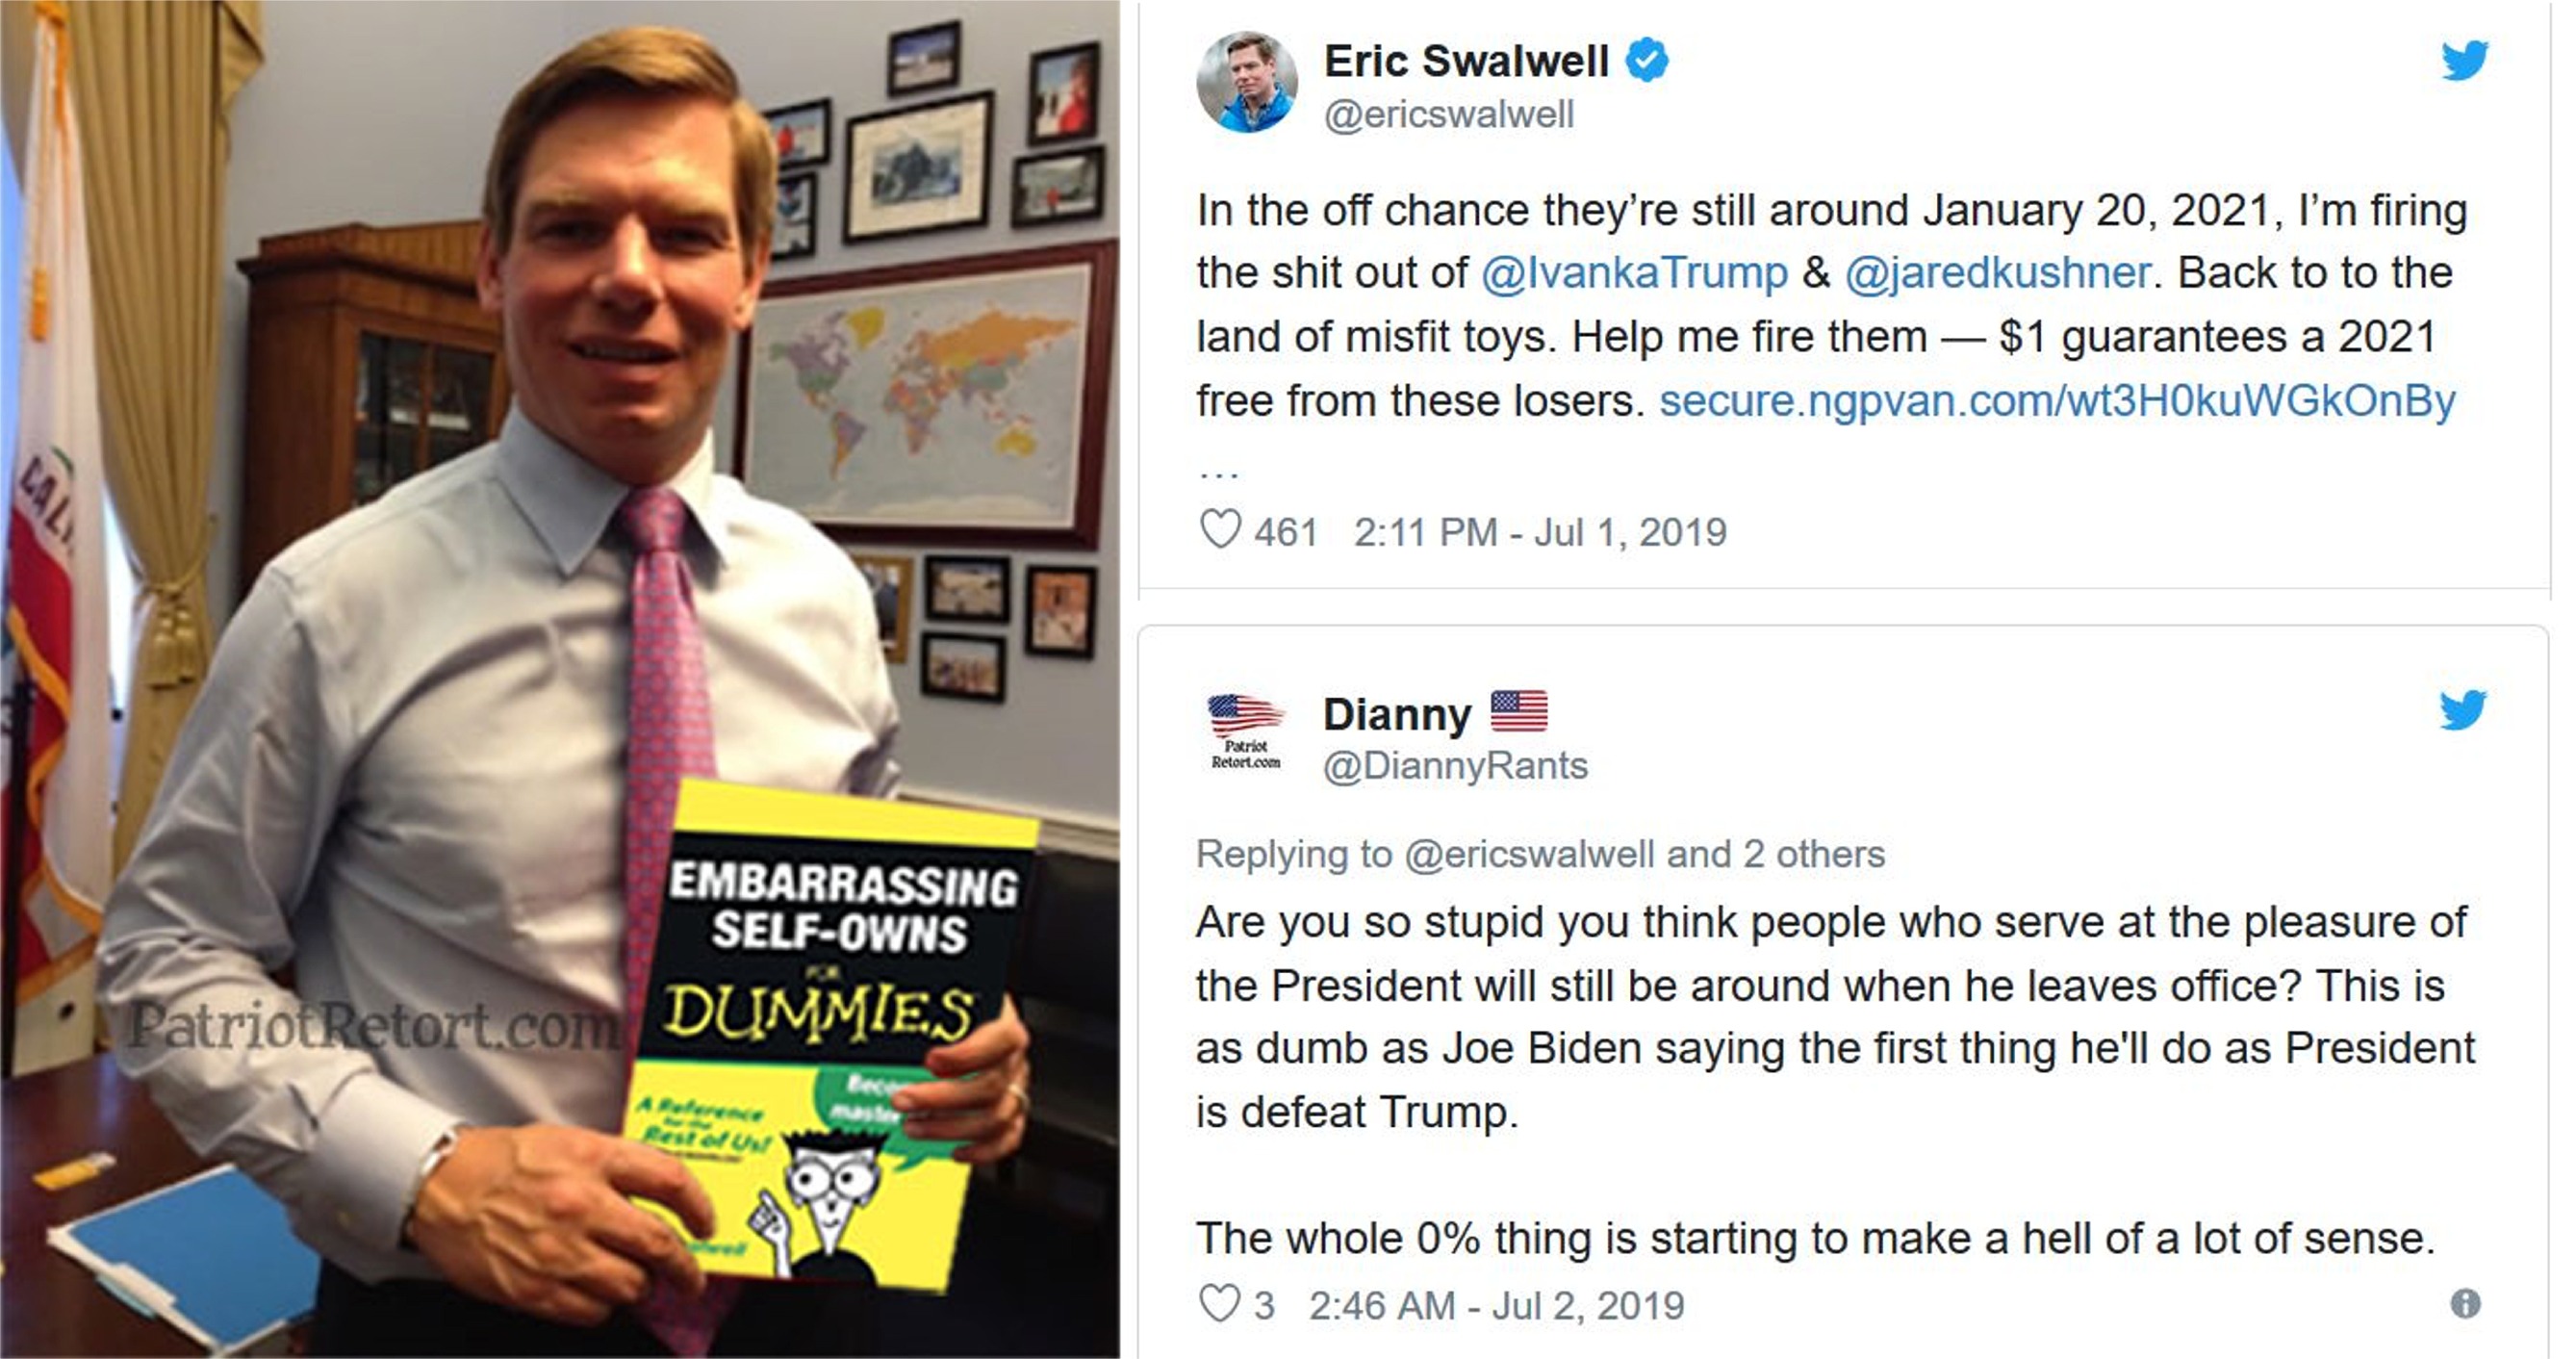 eric swalwell suit - Eric Swalwell In the off chance they're still around , I'm firing the shit out of Trump & . Back to to the land of misfit toys. Help me fire them $1 guarantees a 2021 free from these losers, secure.ngpvan.comwt3HOKUWGkOnBy 461 Diannya